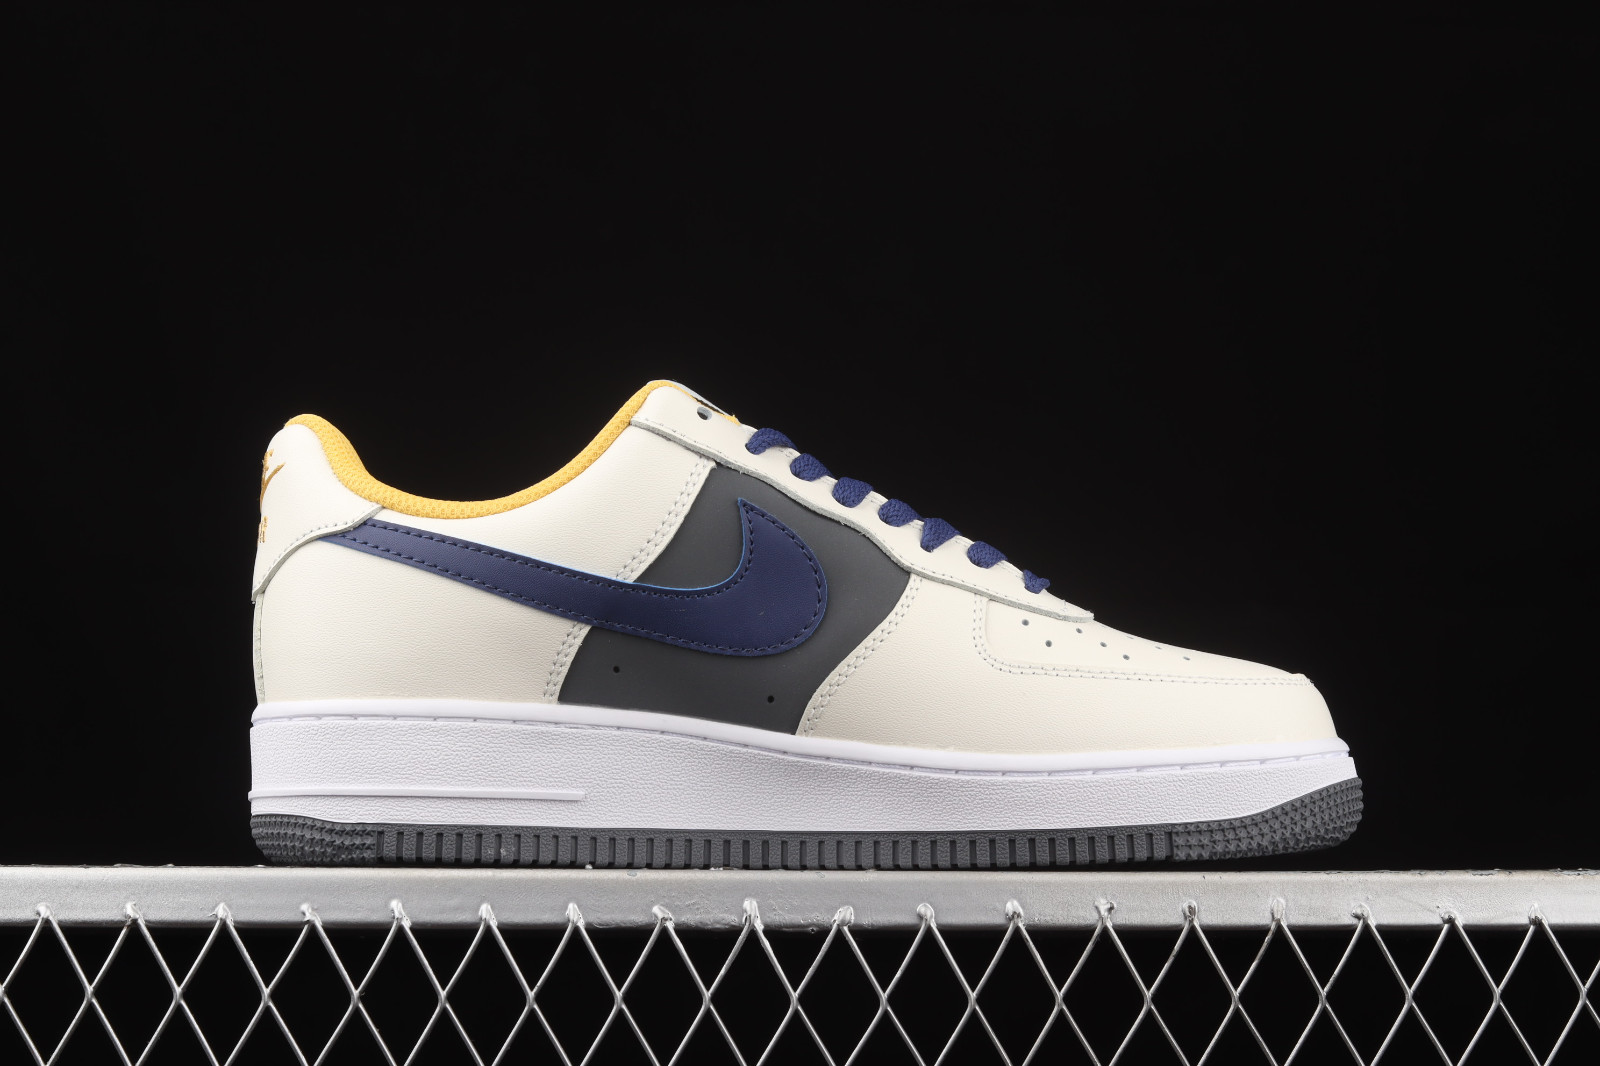 Nike Air Force 1 Low 'Misplaced Swoosh - Pale Yellow